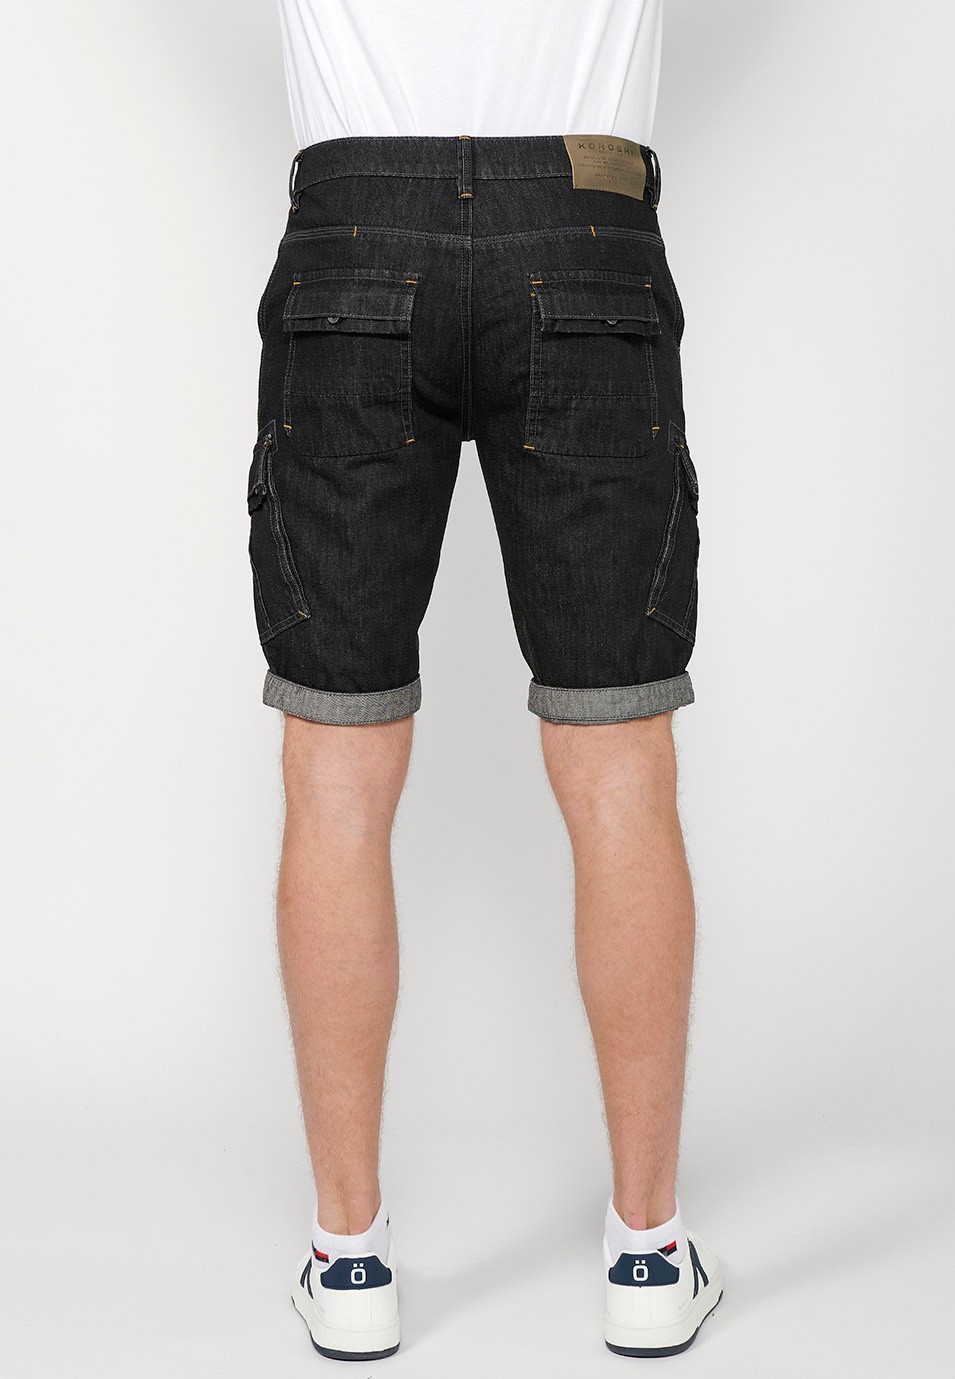 Denim Bermuda Shorts with Turn-Up Finish and Front Zipper and Button Closure with Pockets, One Ticket Pocket and Two Side Pockets in Black for Men 3